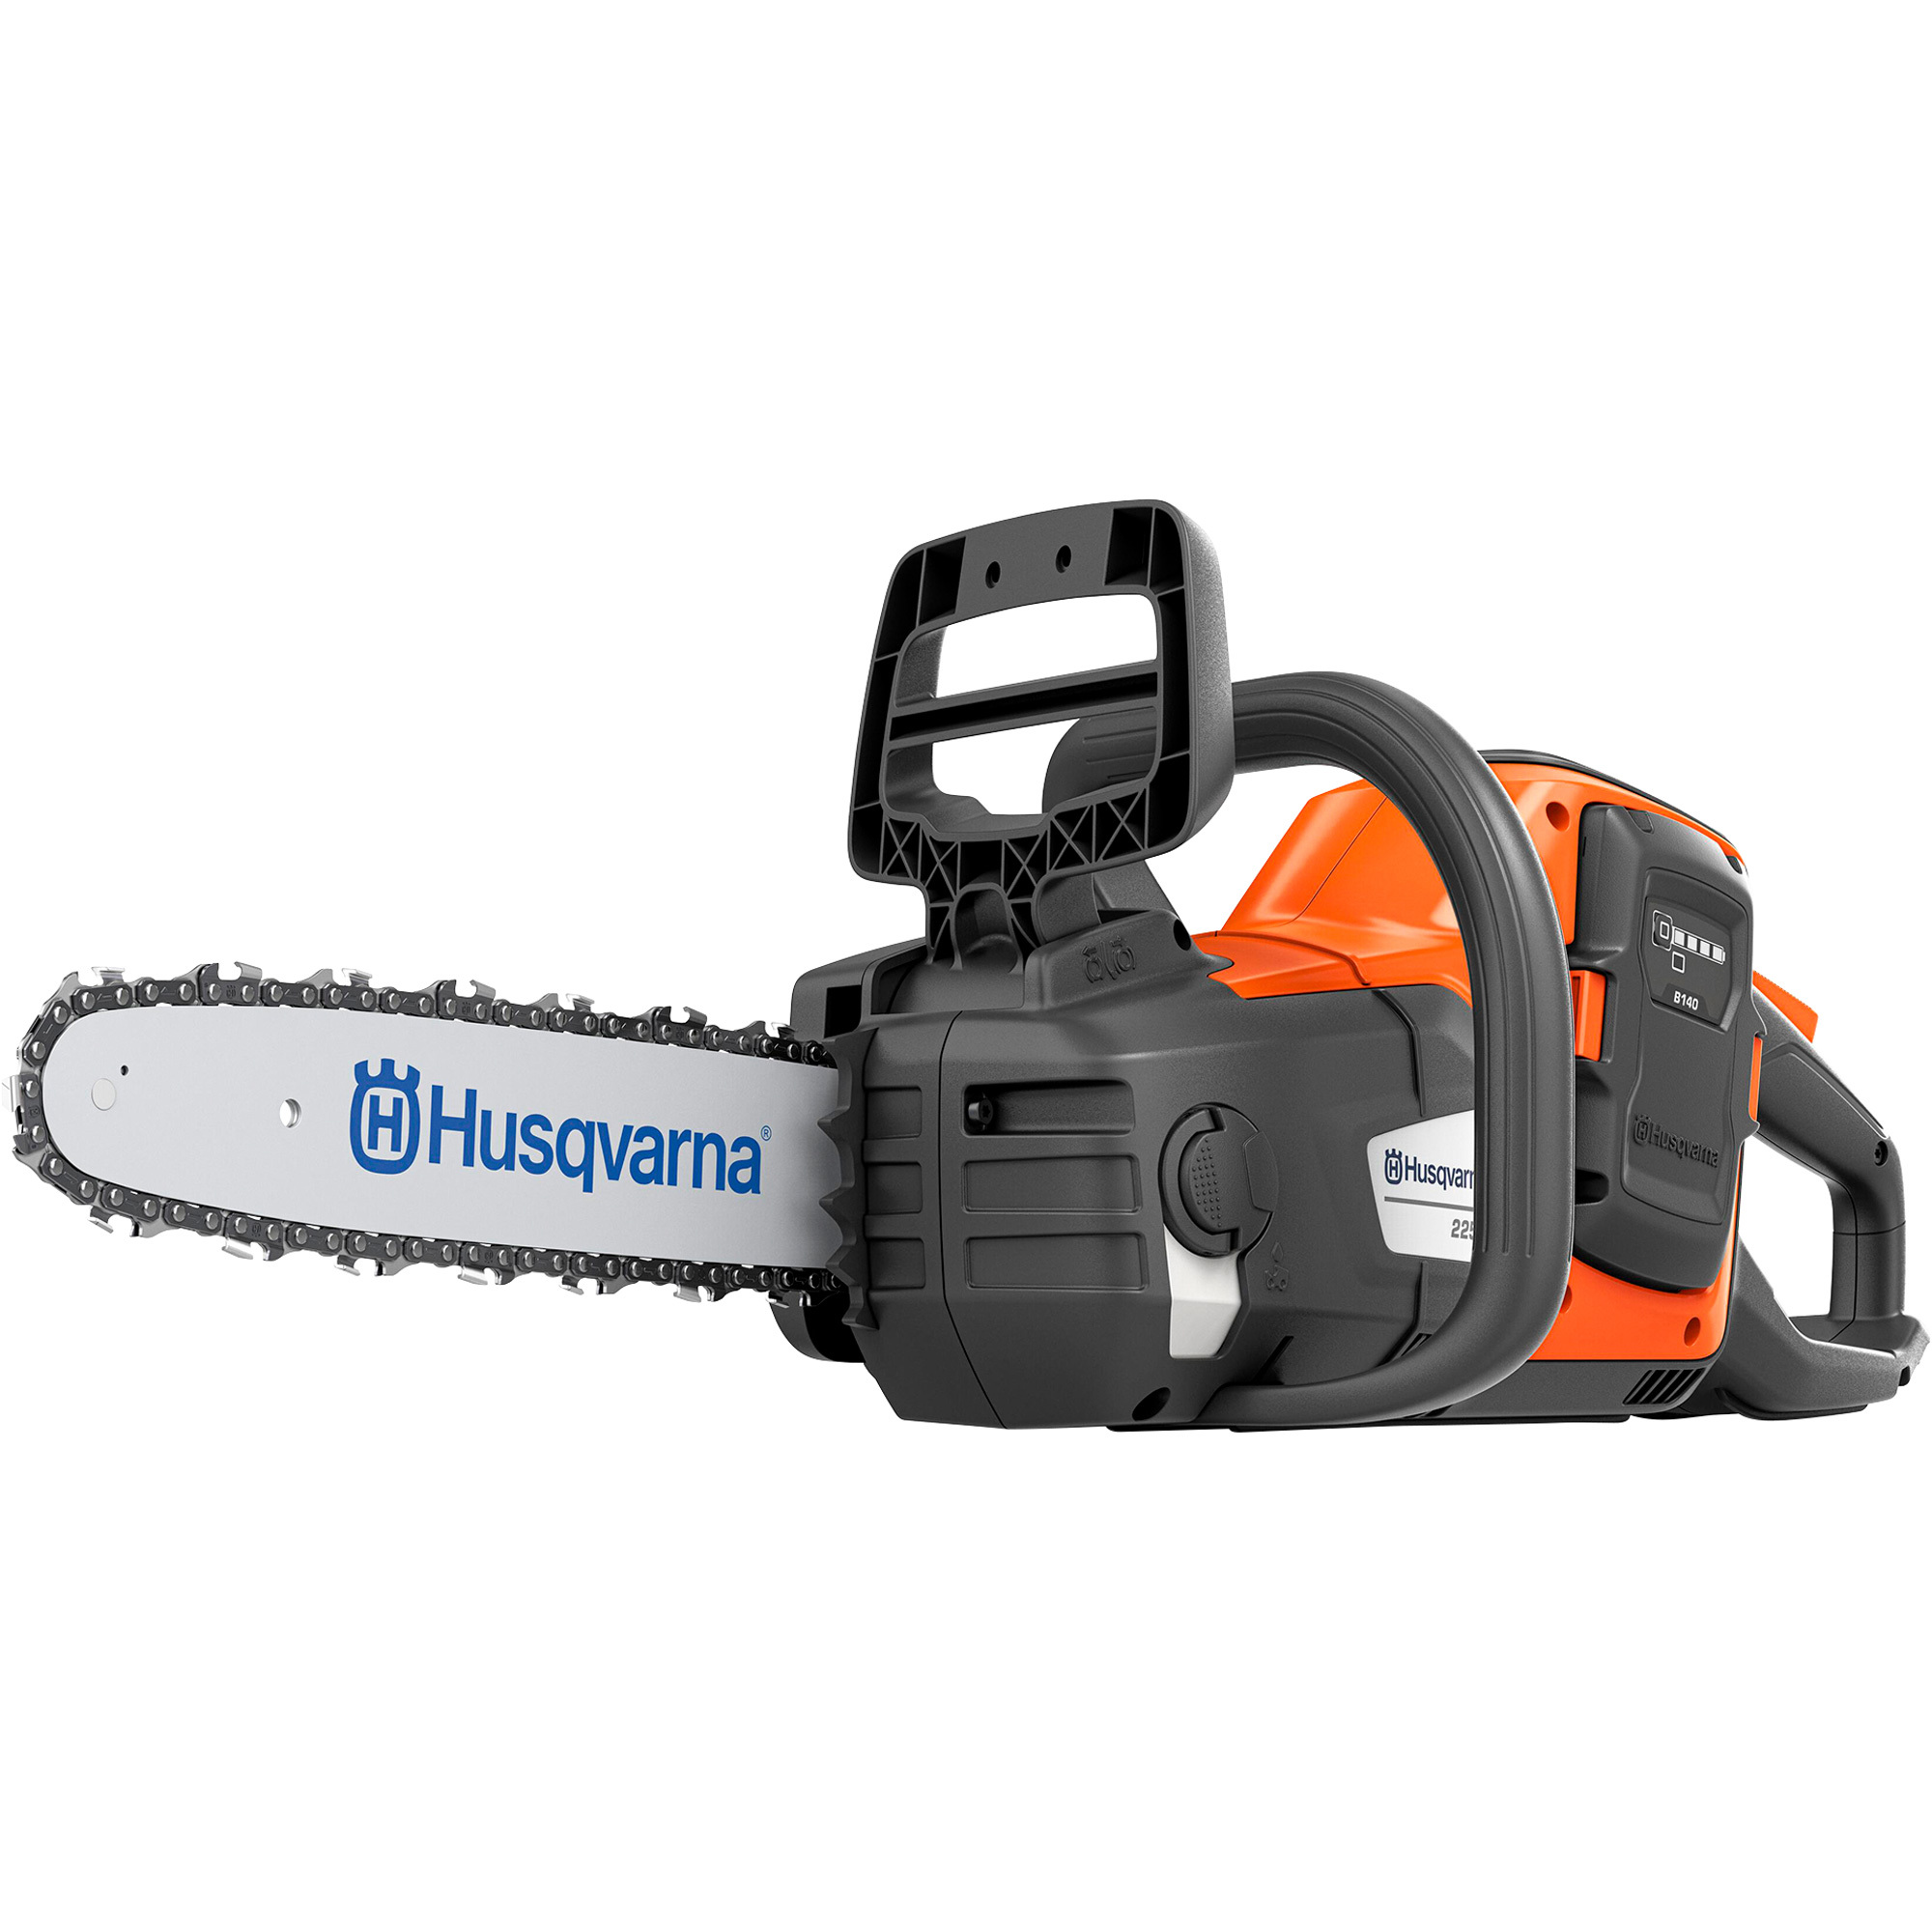 Husqvarna 225i Power Axe Cordless Chainsaw, 14Inch Bar, 40V Lithium-Ion Battery and Charger, Model 225i